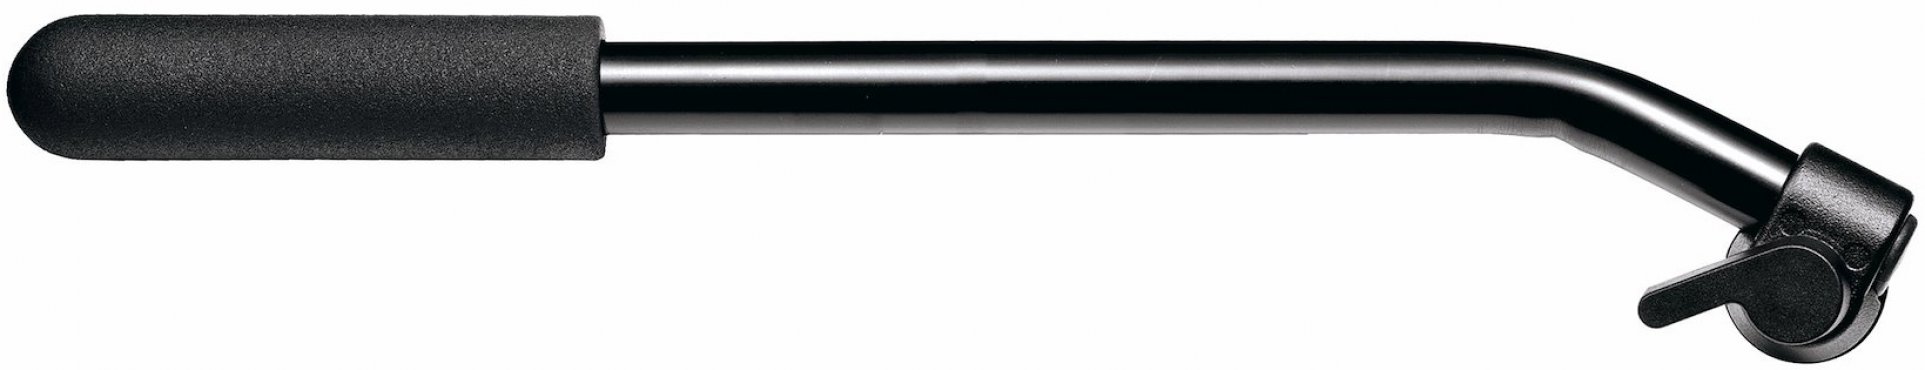 Manfrotto Pan Bar For 501HDV Video Head